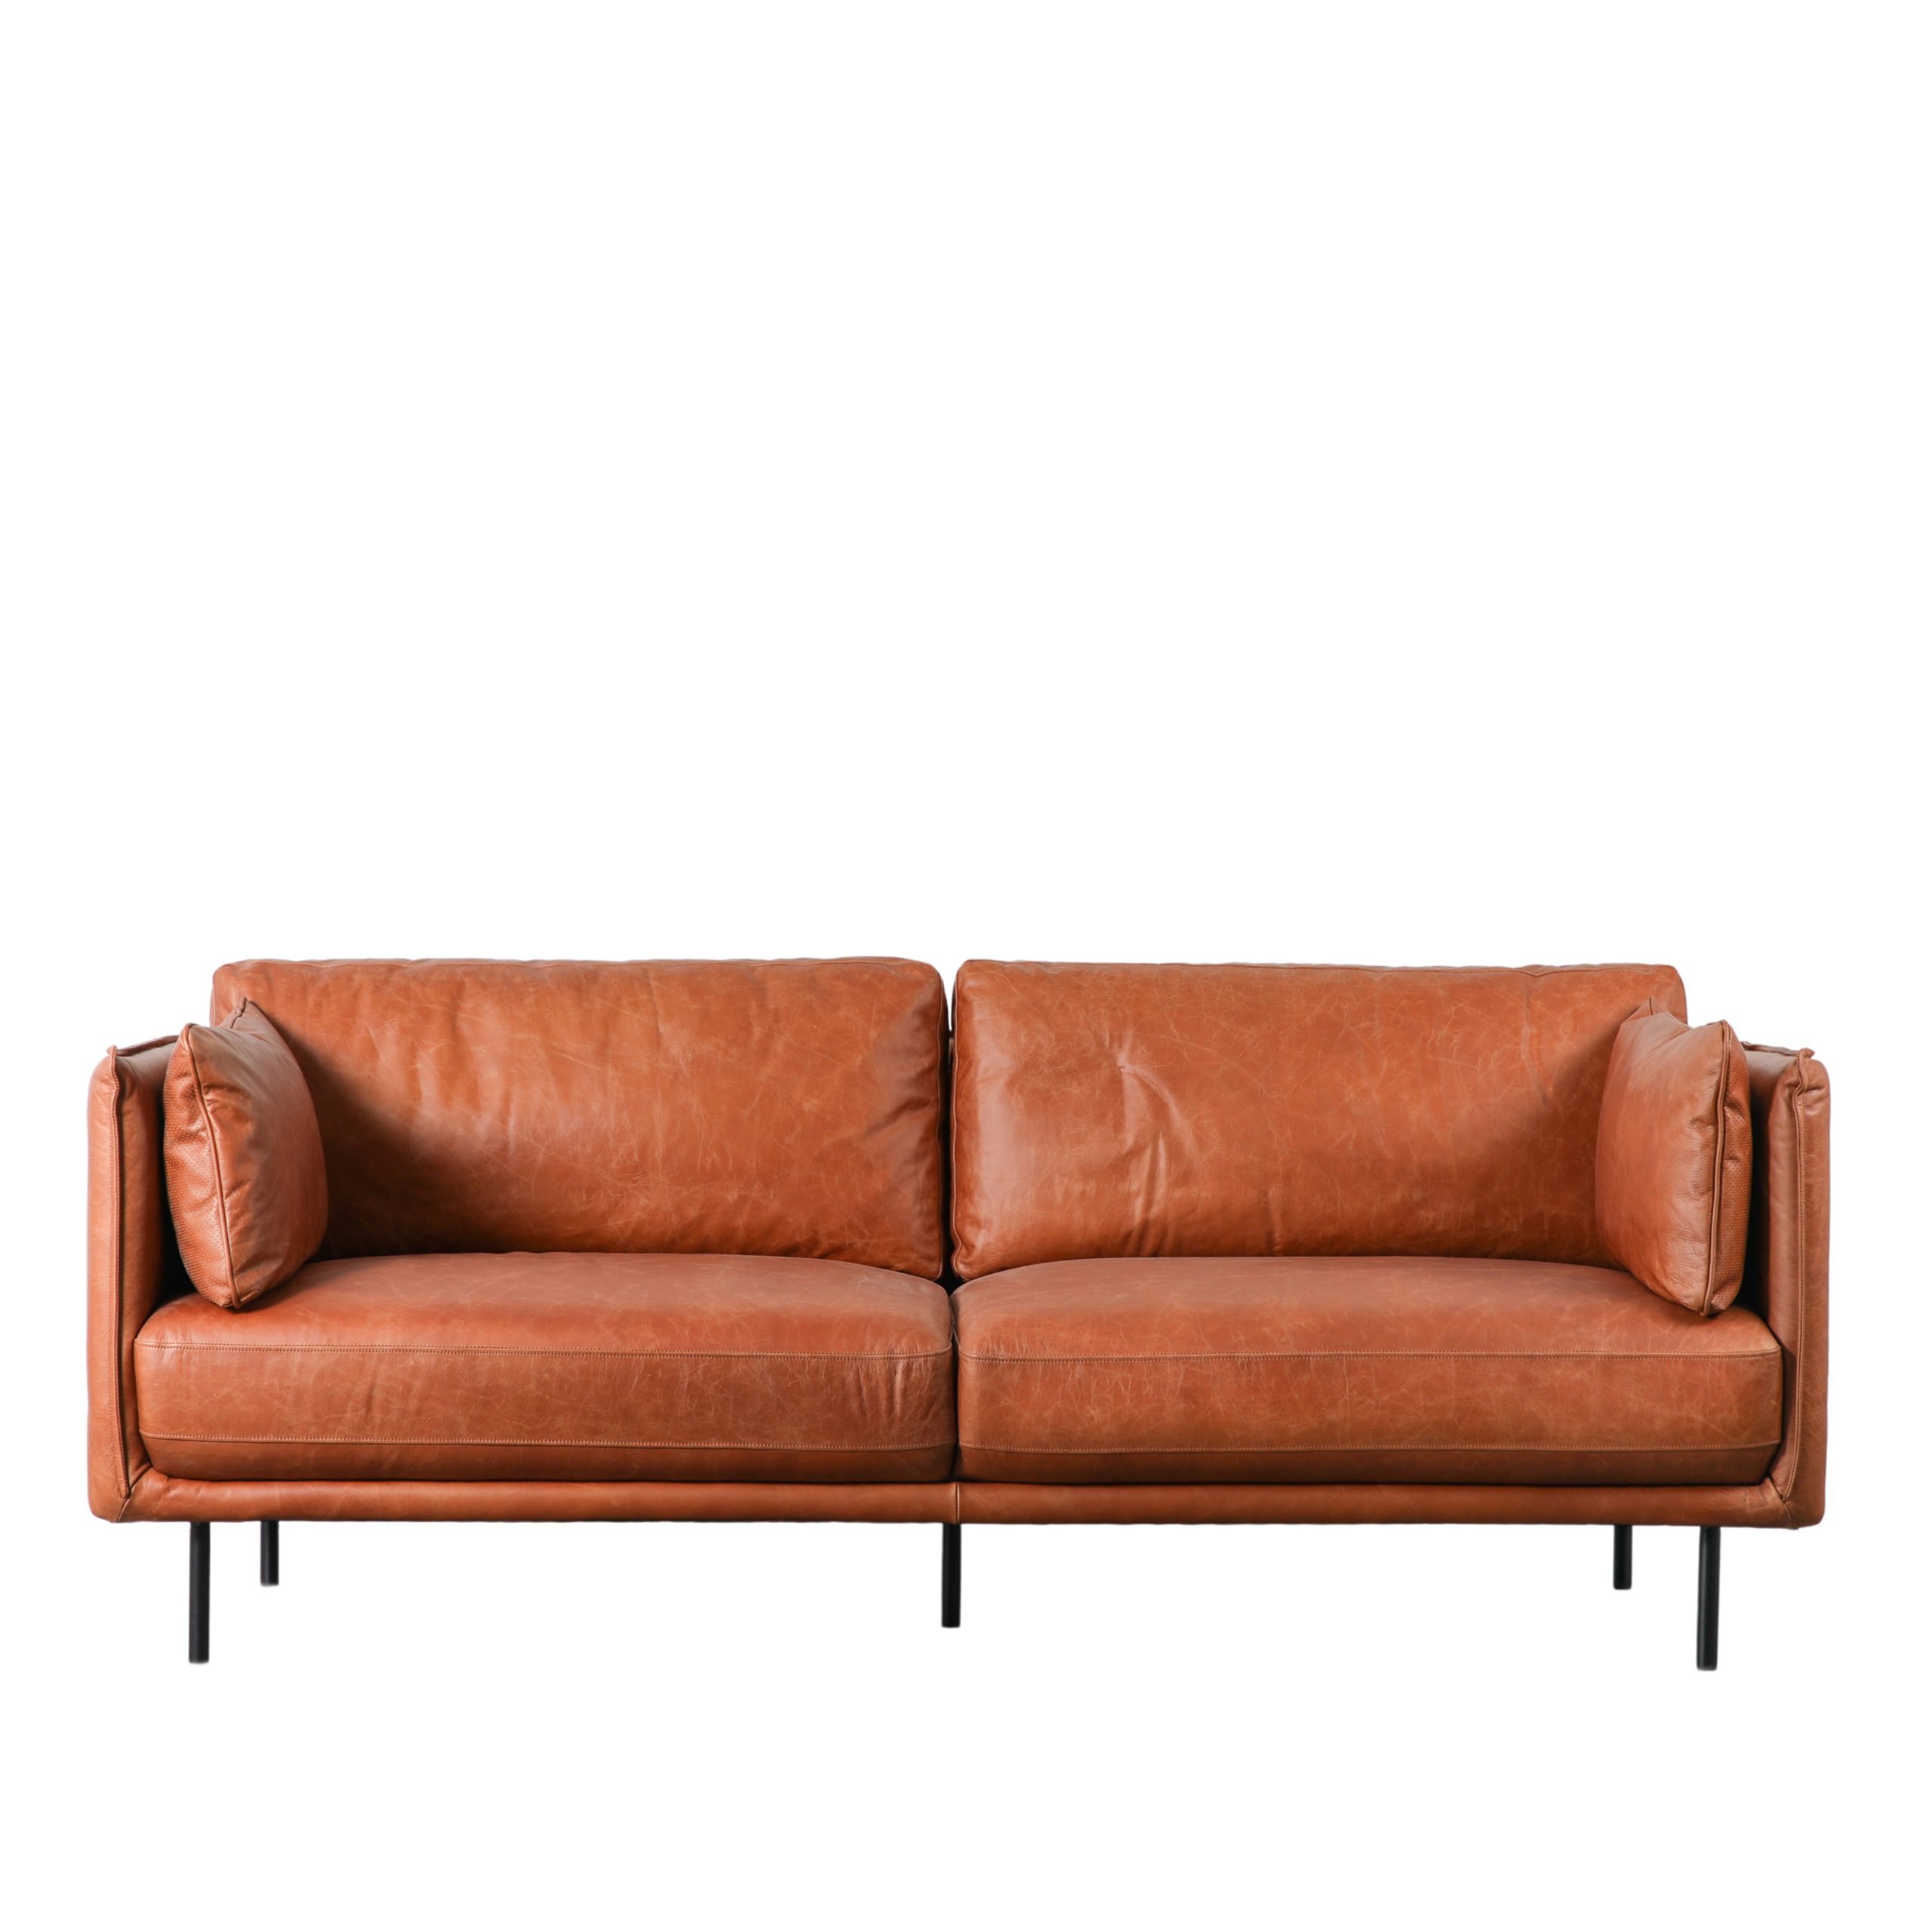 Gallery Direct Wigmore Sofa Brown Leather